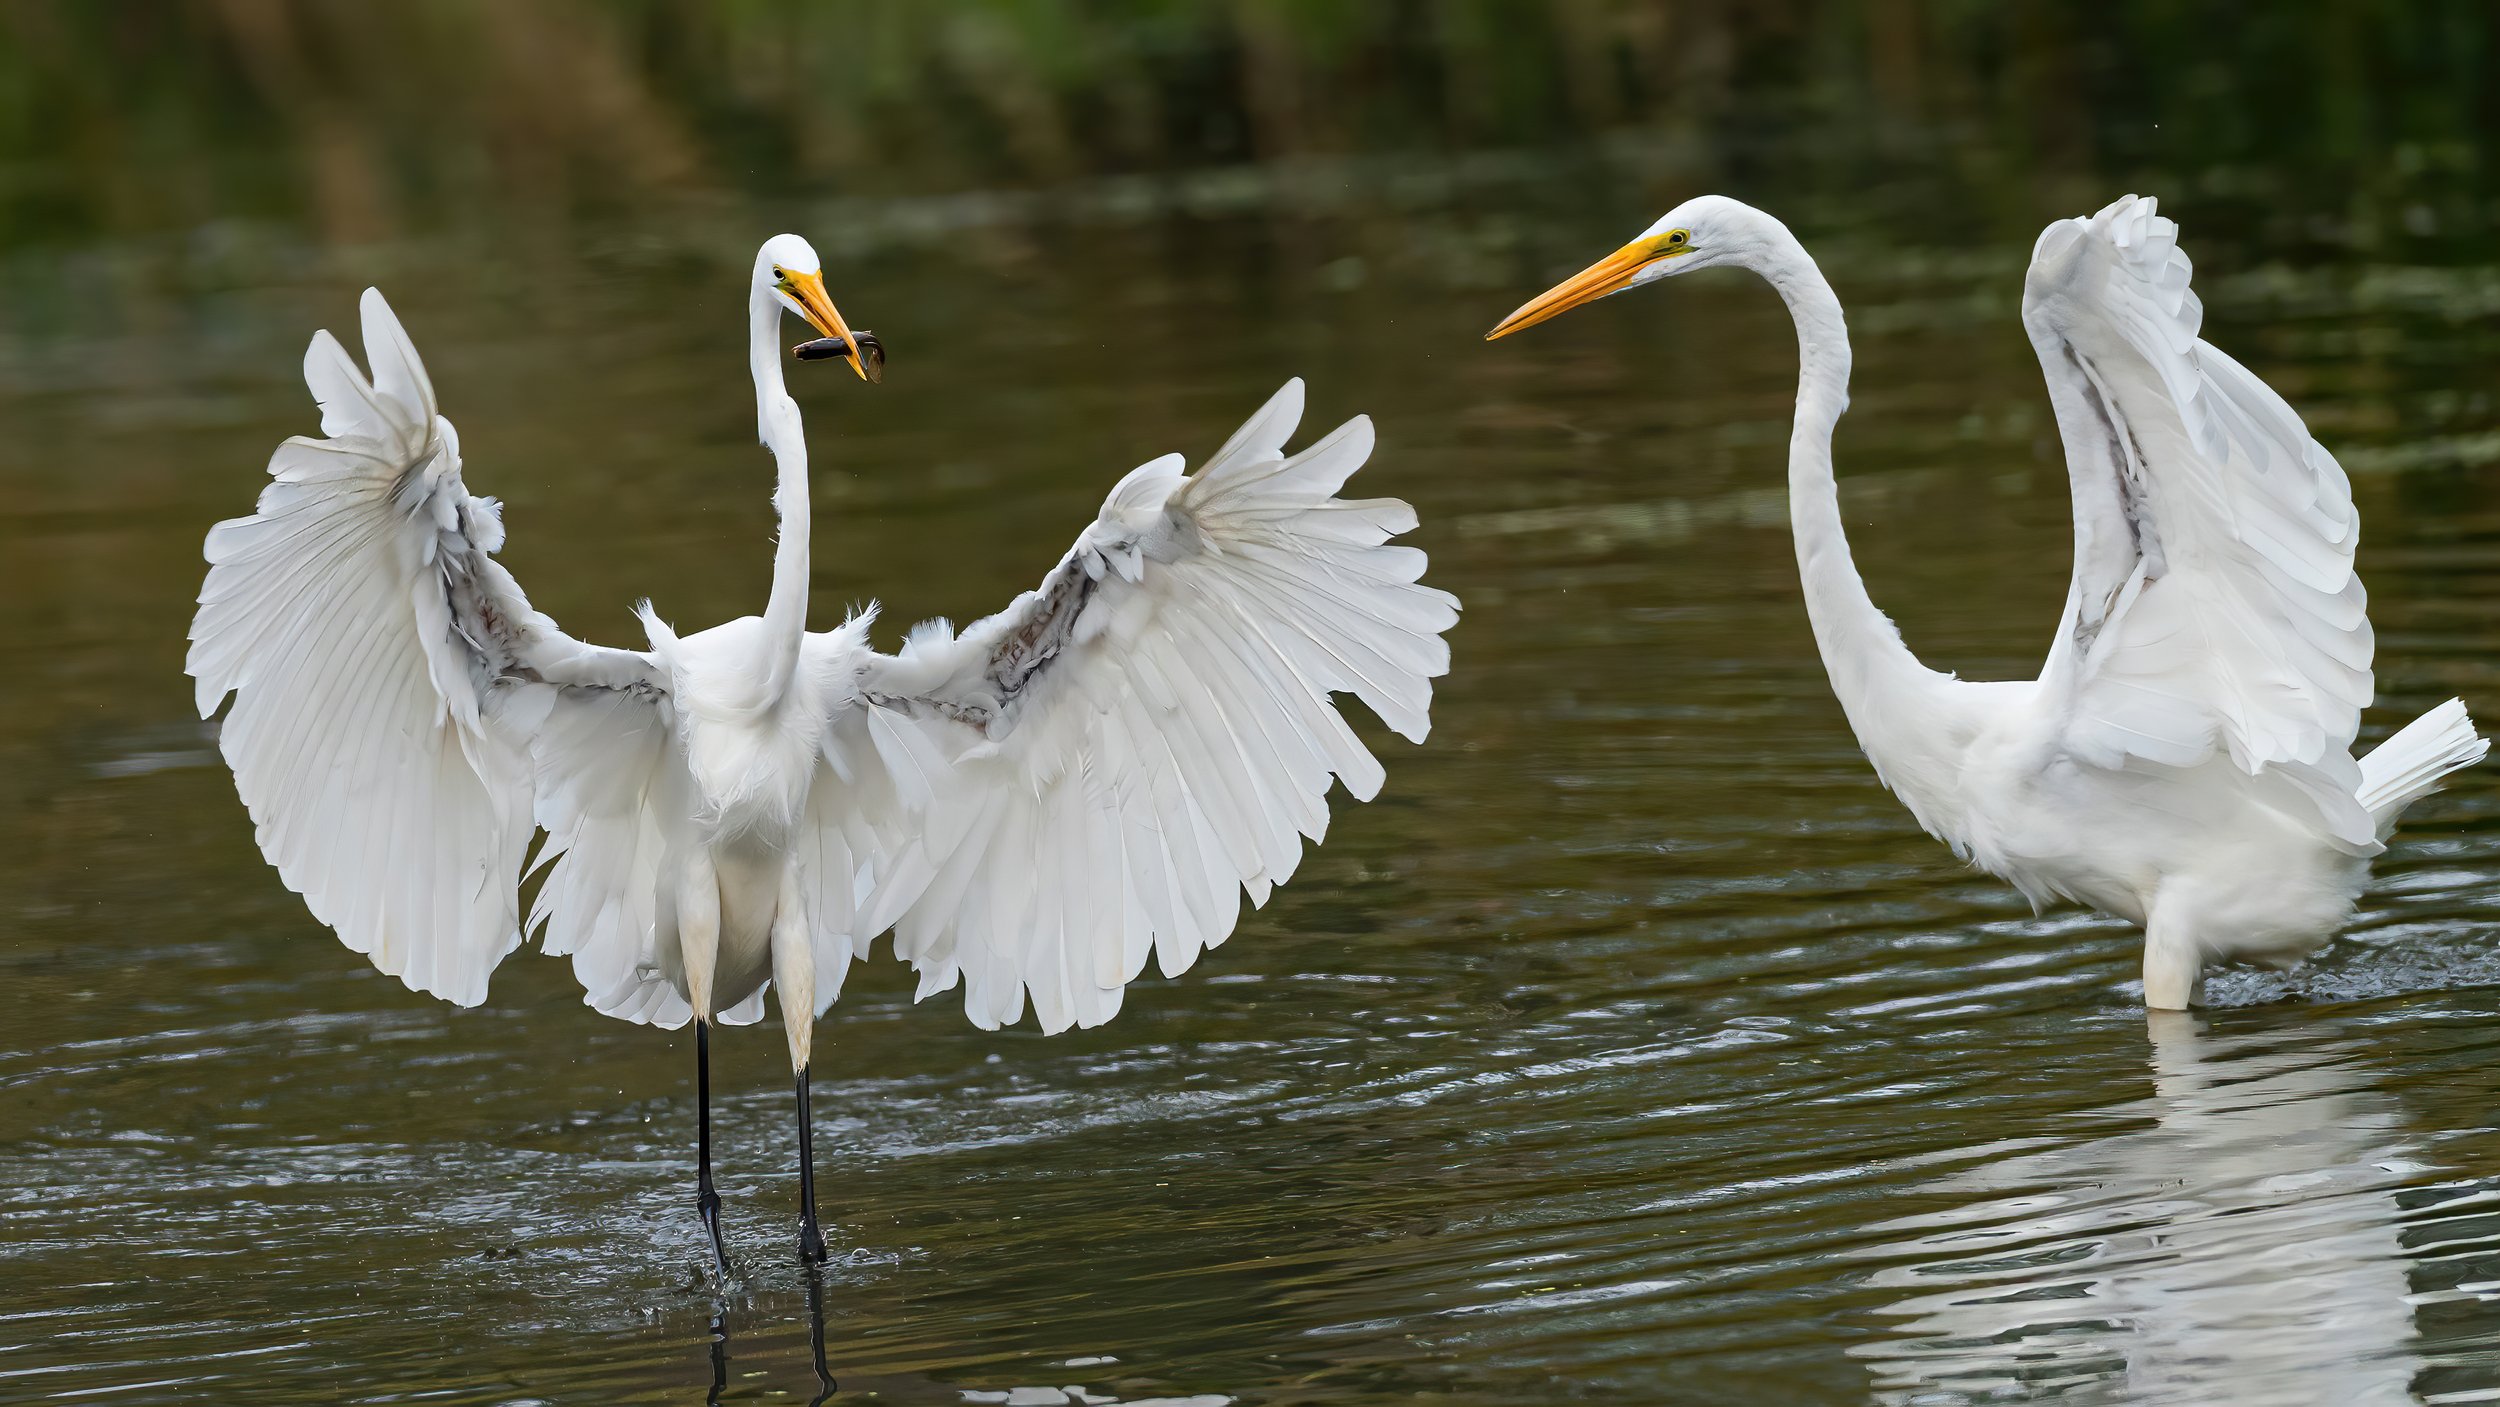 13 A great white egret shows off its catch to its neighbor.jpg